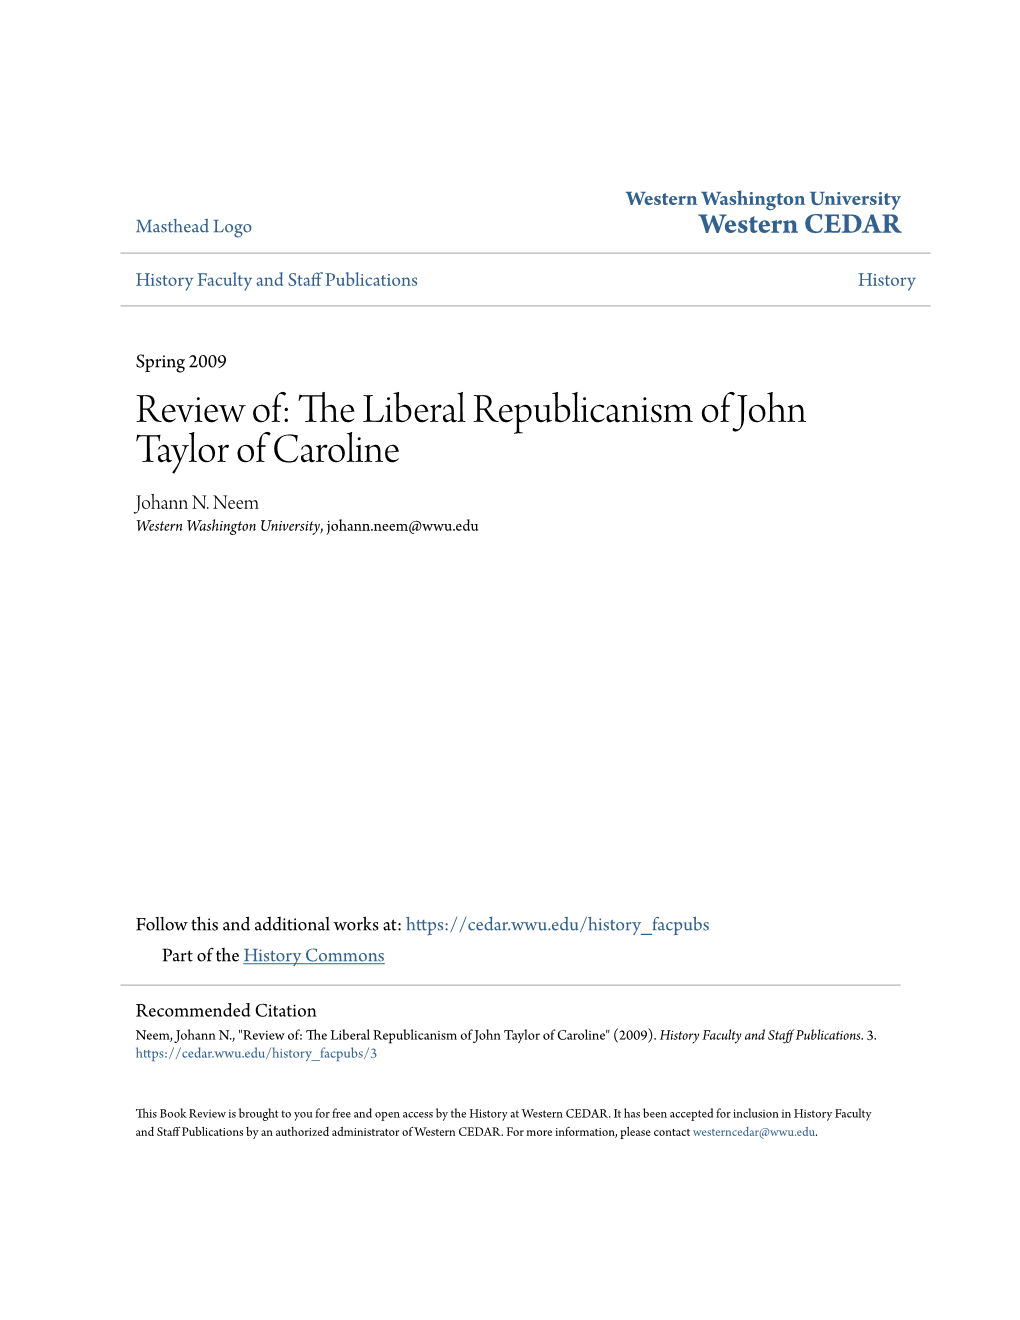 Review Of: the Liberal Republicanism of John Taylor of Caroline Johann N